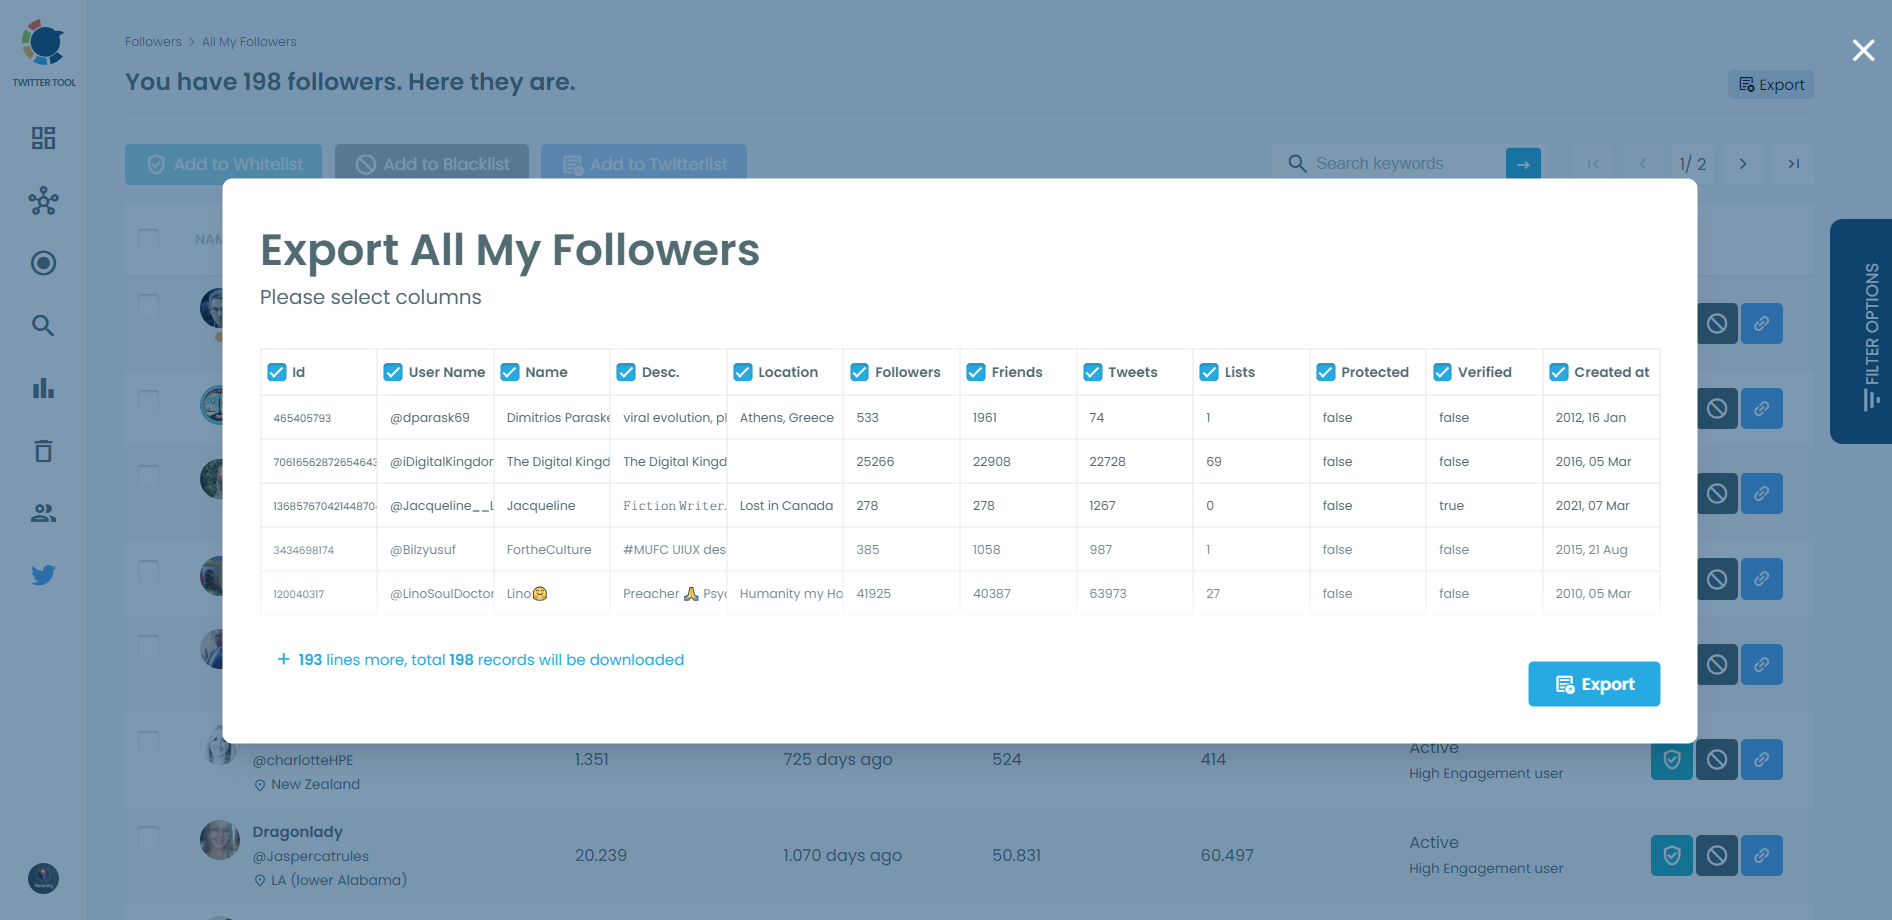 Data to export with your followers on Twitter